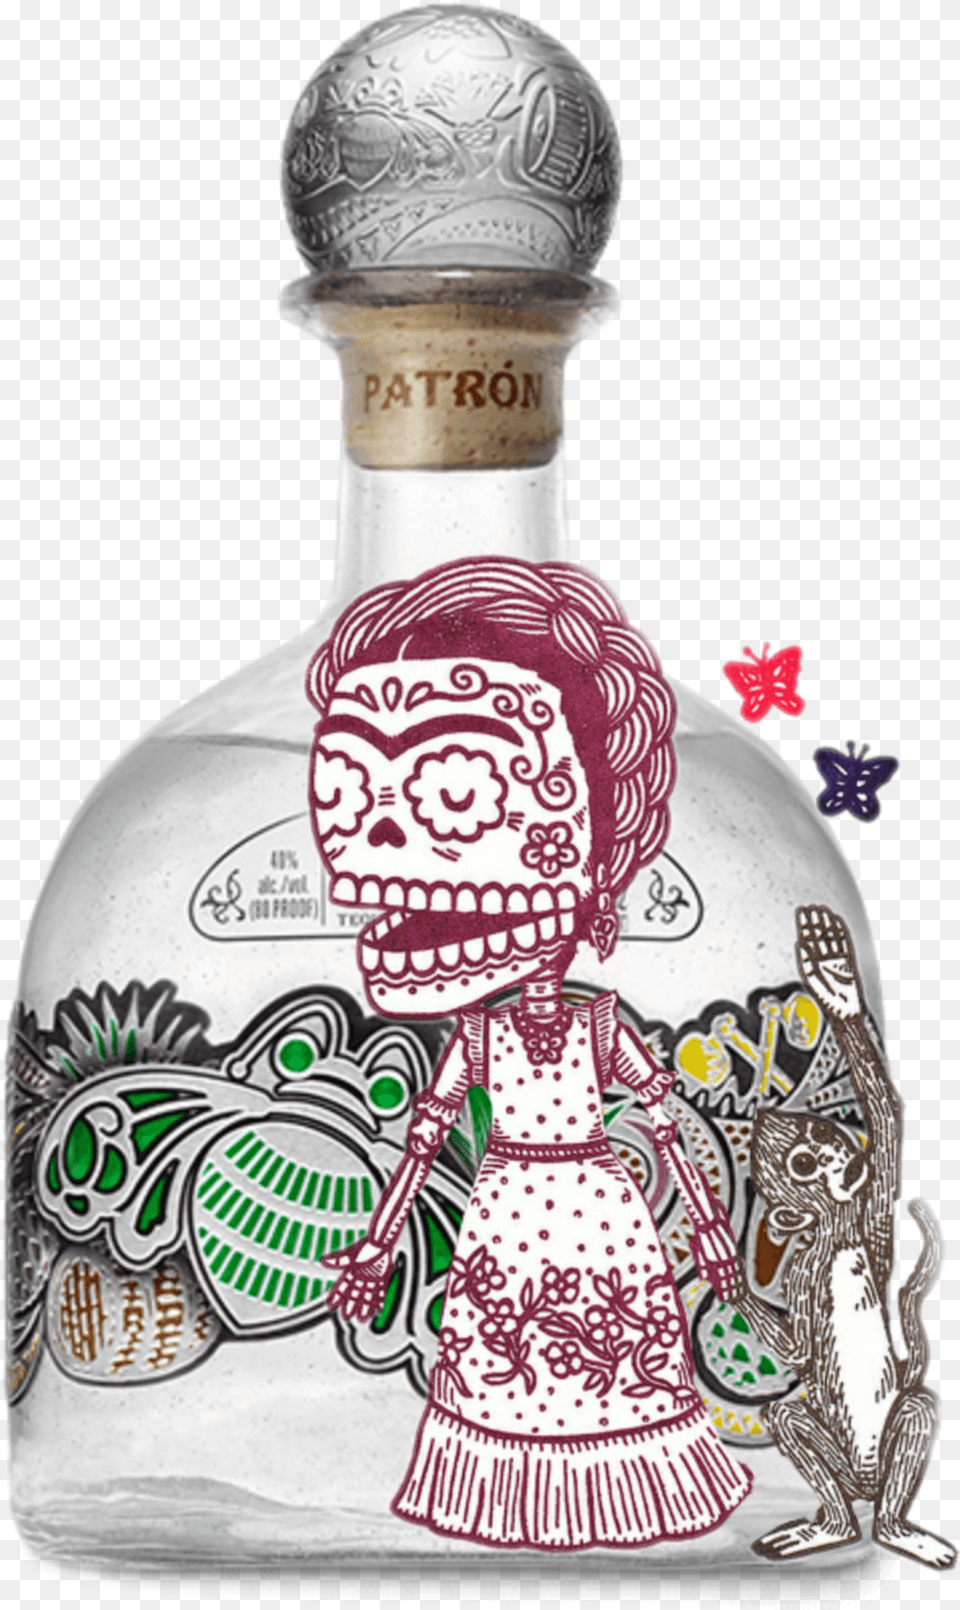 Scbottle Bottle Tequila Mexico Patrn Patron Silver Limited Tequila, Alcohol, Beverage, Liquor, Face Free Png Download